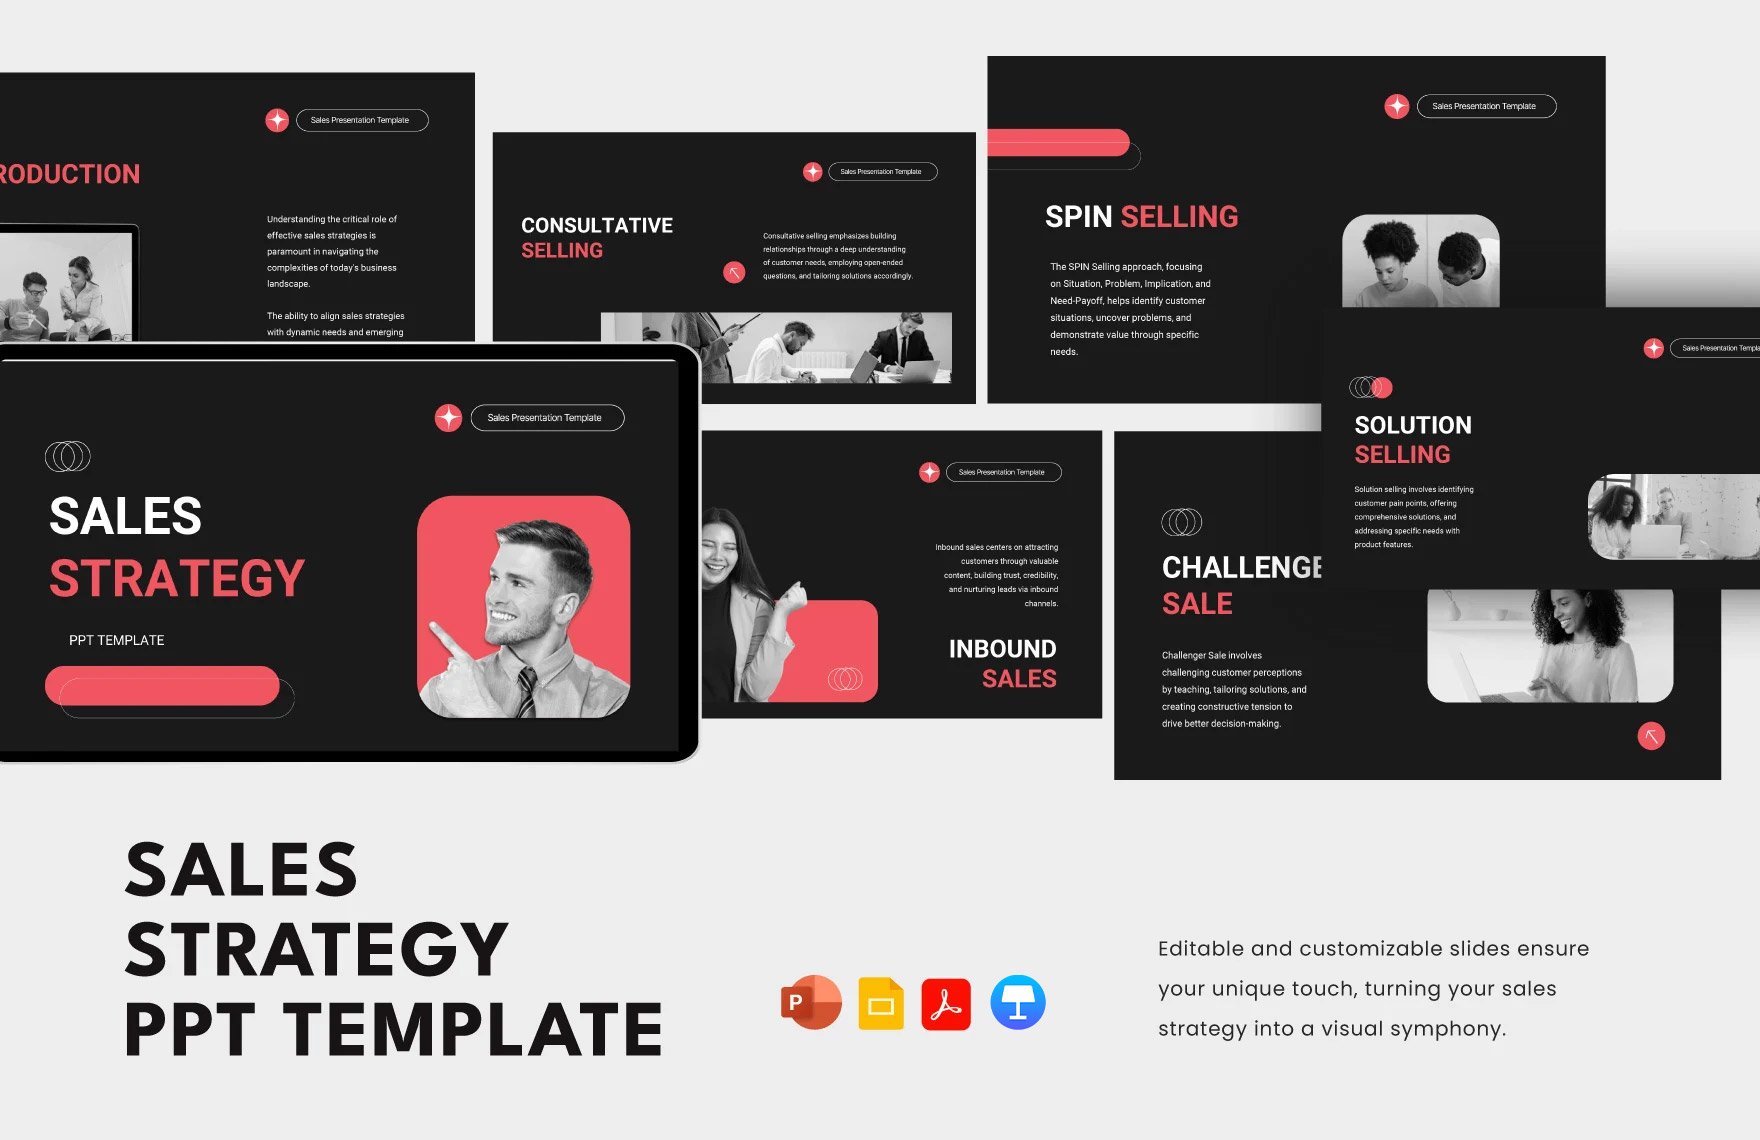 Sales Strategy PPT Template